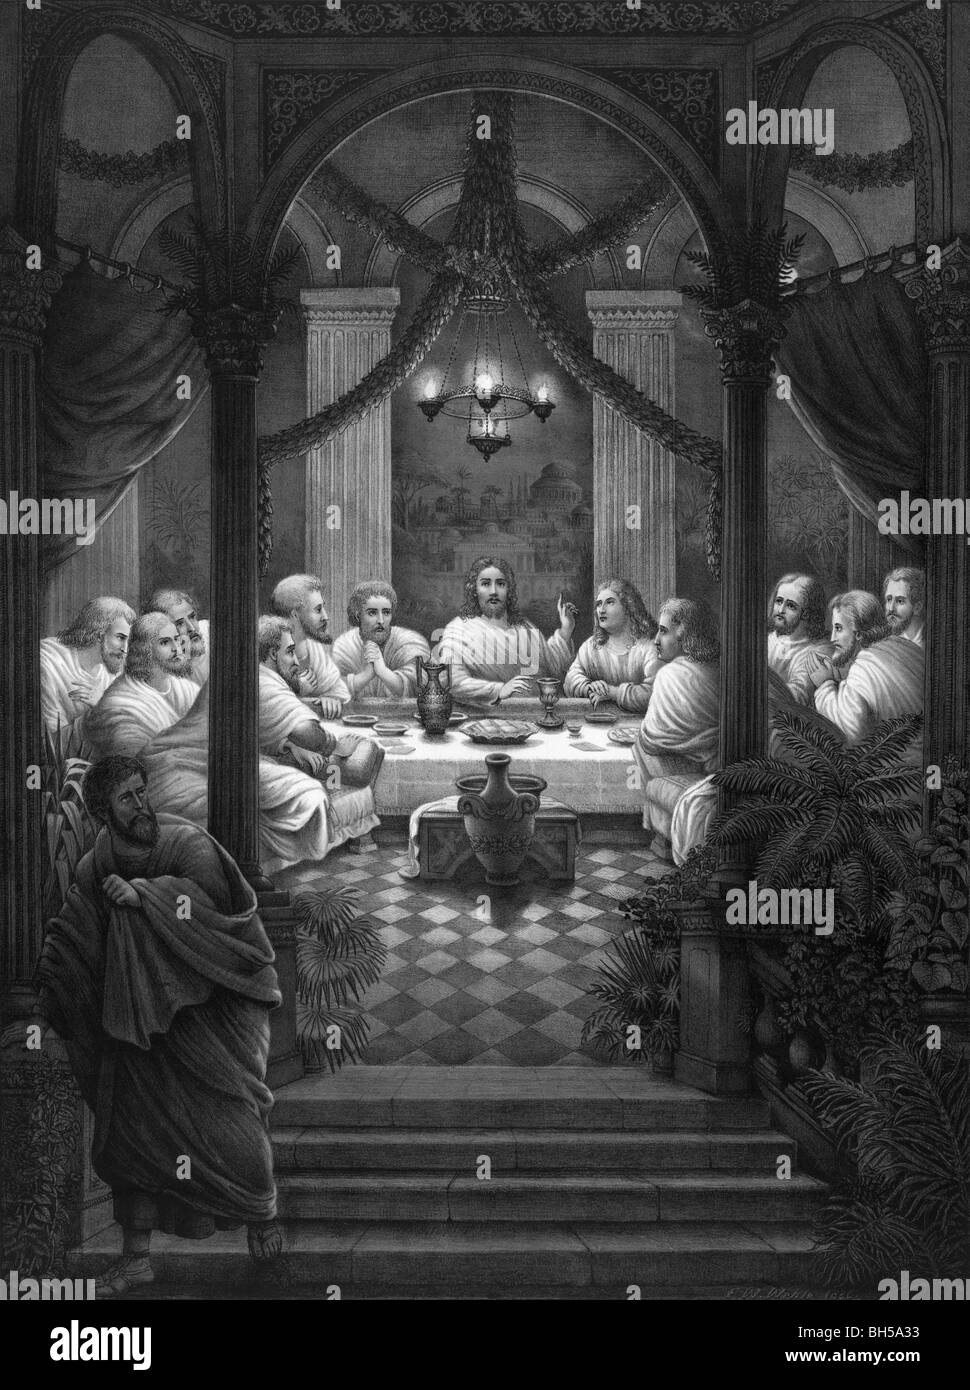 Print circa 1886 showing the Last Supper of Jesus Christ and his disciples as depicted in the Gospels. Stock Photo